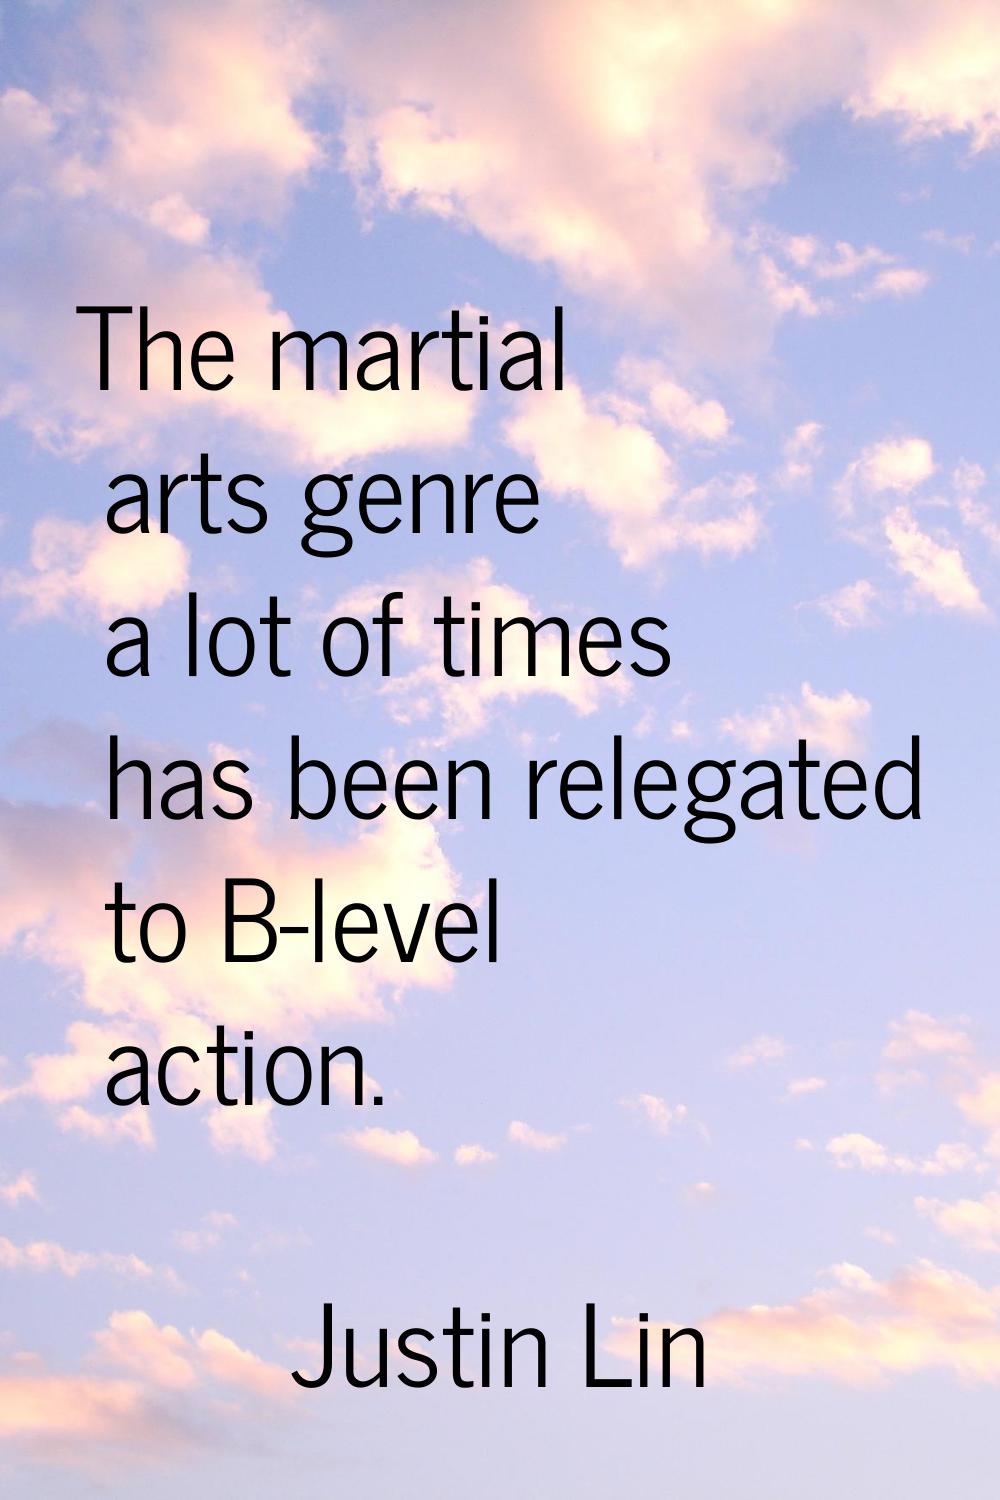 The martial arts genre a lot of times has been relegated to B-level action.